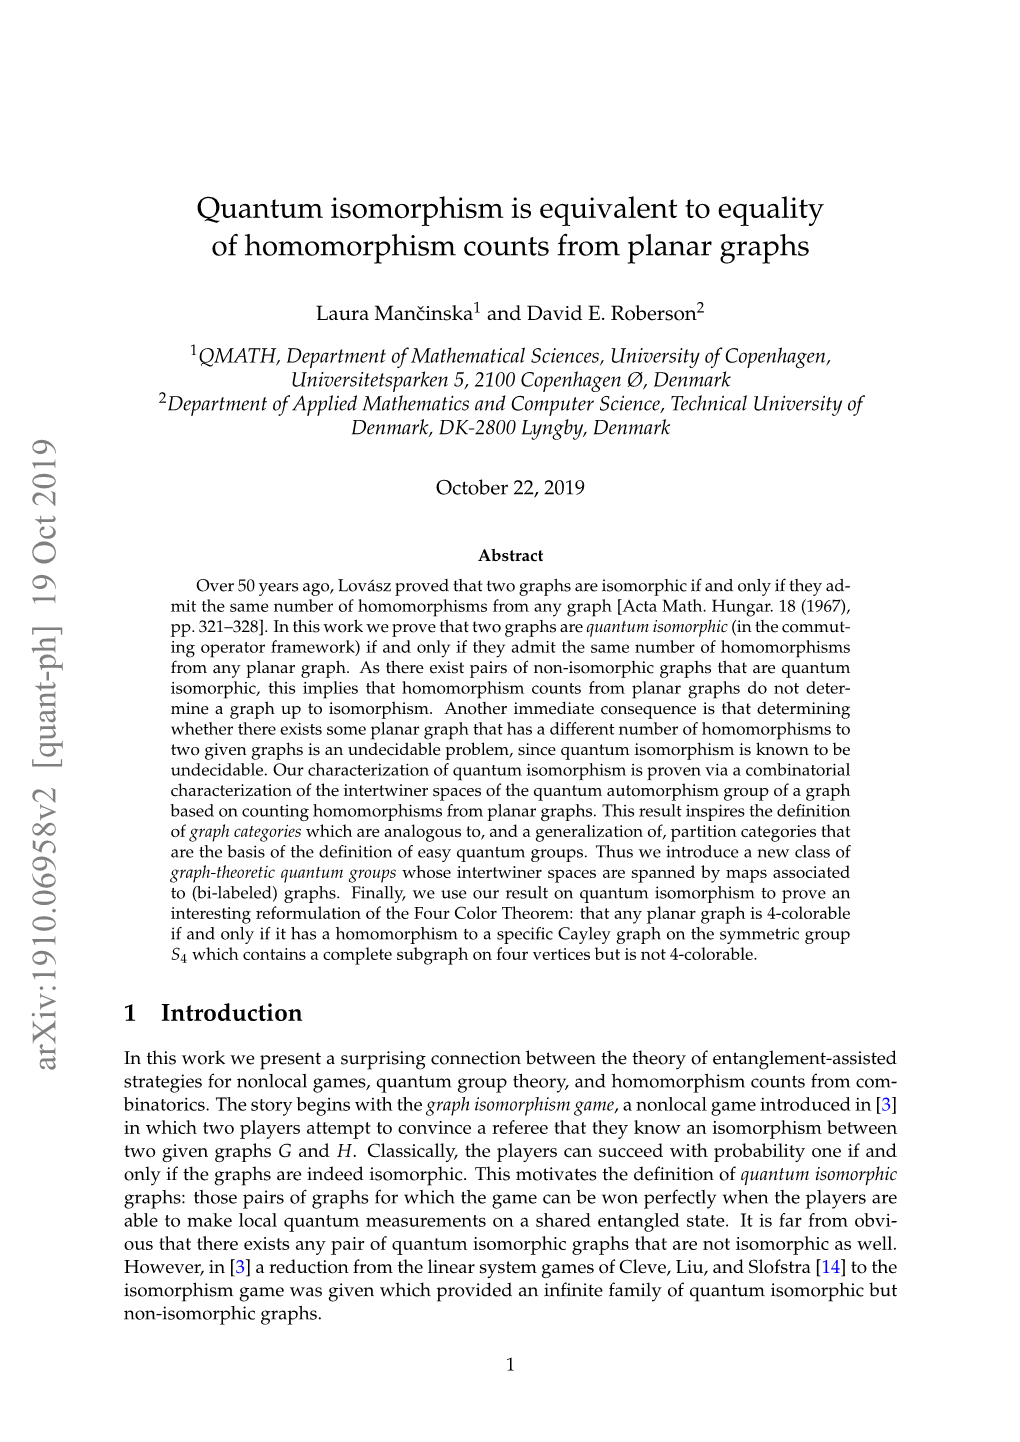 Quantum Isomorphism Is Equivalent to Equality of Homomorphism Counts from Planar Graphs